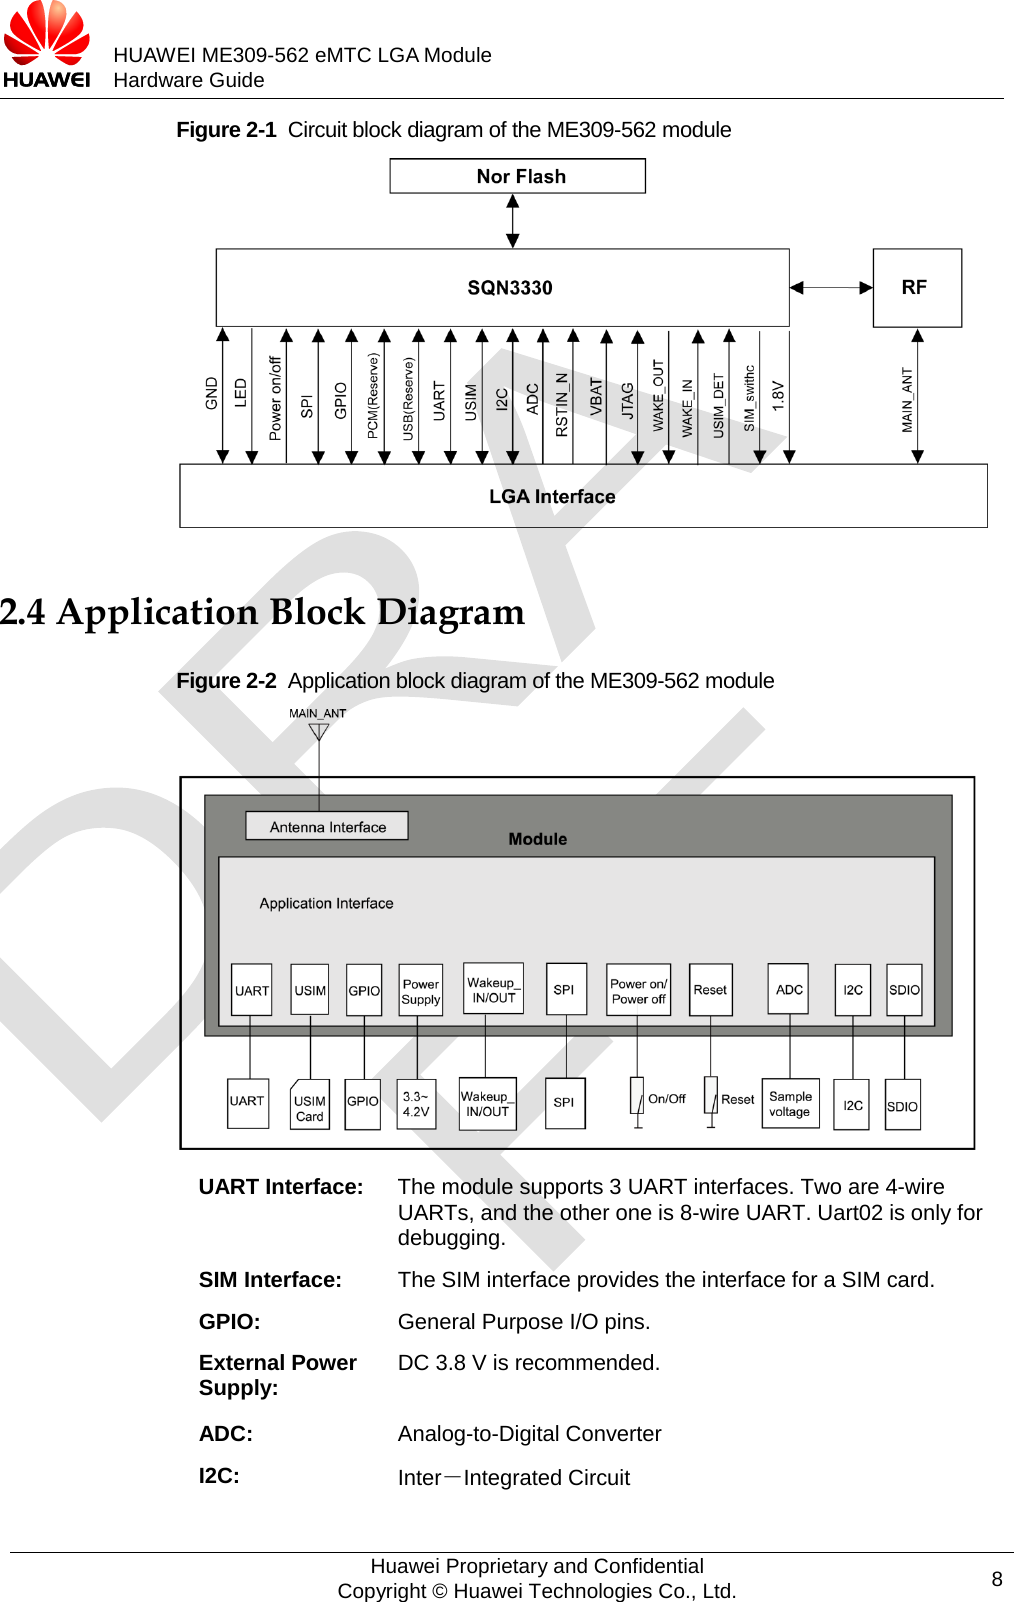           HUAWEI ME309-562 eMTC LGA Module Hardware Guide  Figure 2-1  Circuit block diagram of the ME309-562 module    2.4 Application Block Diagram Figure 2-2  Application block diagram of the ME309-562 module  UART Interface:  The module supports 3 UART interfaces. Two are 4-wire UARTs, and the other one is 8-wire UART. Uart02 is only for debugging. SIM Interface:  The SIM interface provides the interface for a SIM card. GPIO:  General Purpose I/O pins. External Power Supply: DC 3.8 V is recommended. ADC: Analog-to-Digital Converter I2C: Inter－Integrated Circuit  Huawei Proprietary and Confidential Copyright © Huawei Technologies Co., Ltd. 8  